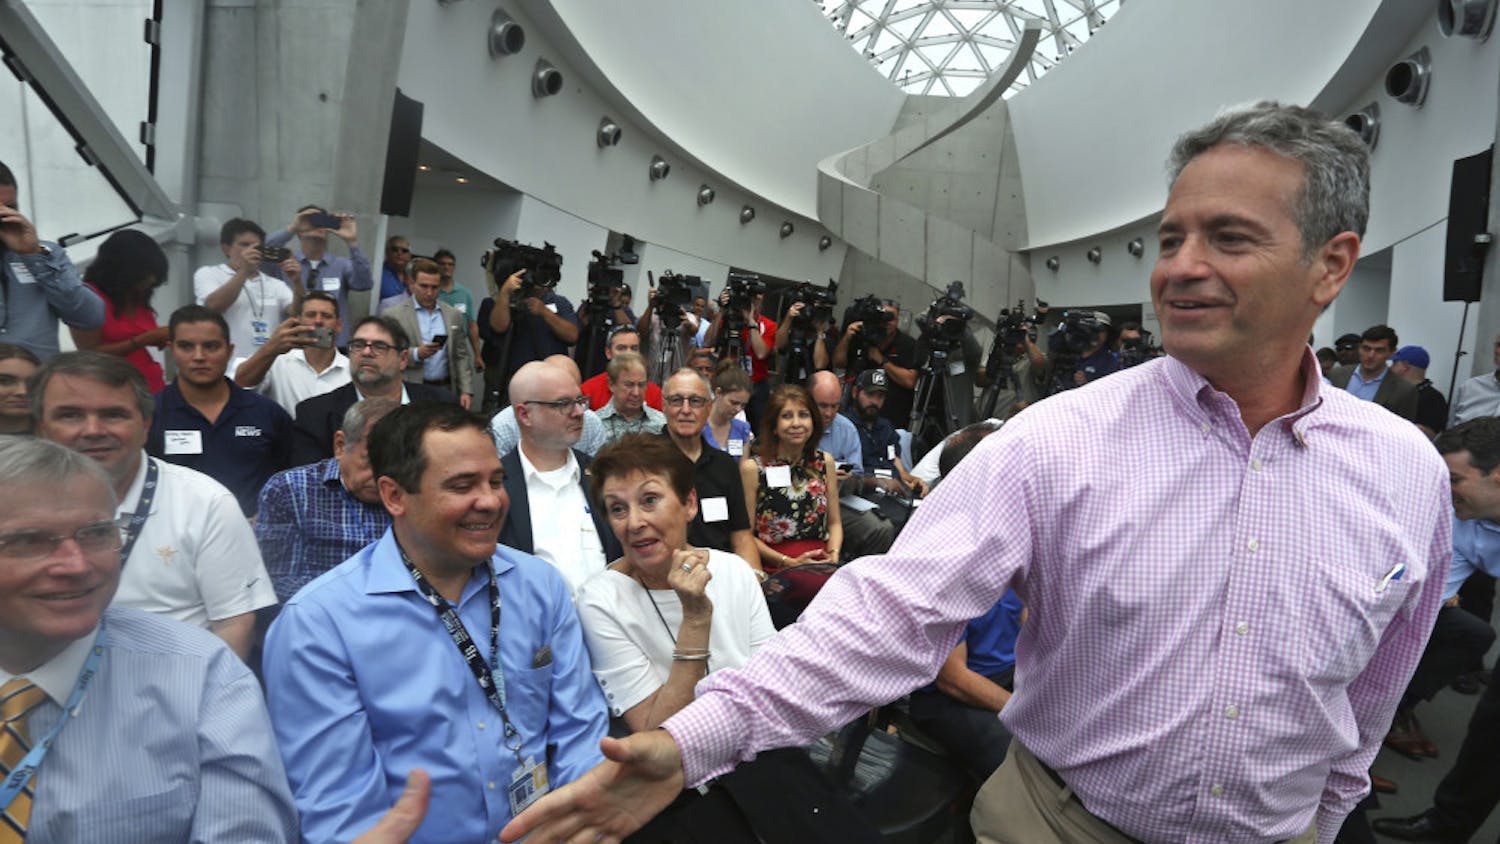 Tampa Bay Rays Principal Owner Stuart Sternberg greets people before a press conference at the Dali Museum in St. Petersburg, Fla., Tuesday, June 25, 2019. Sternberg spoke about exploring the prospect of playing some future home games in Montreal.